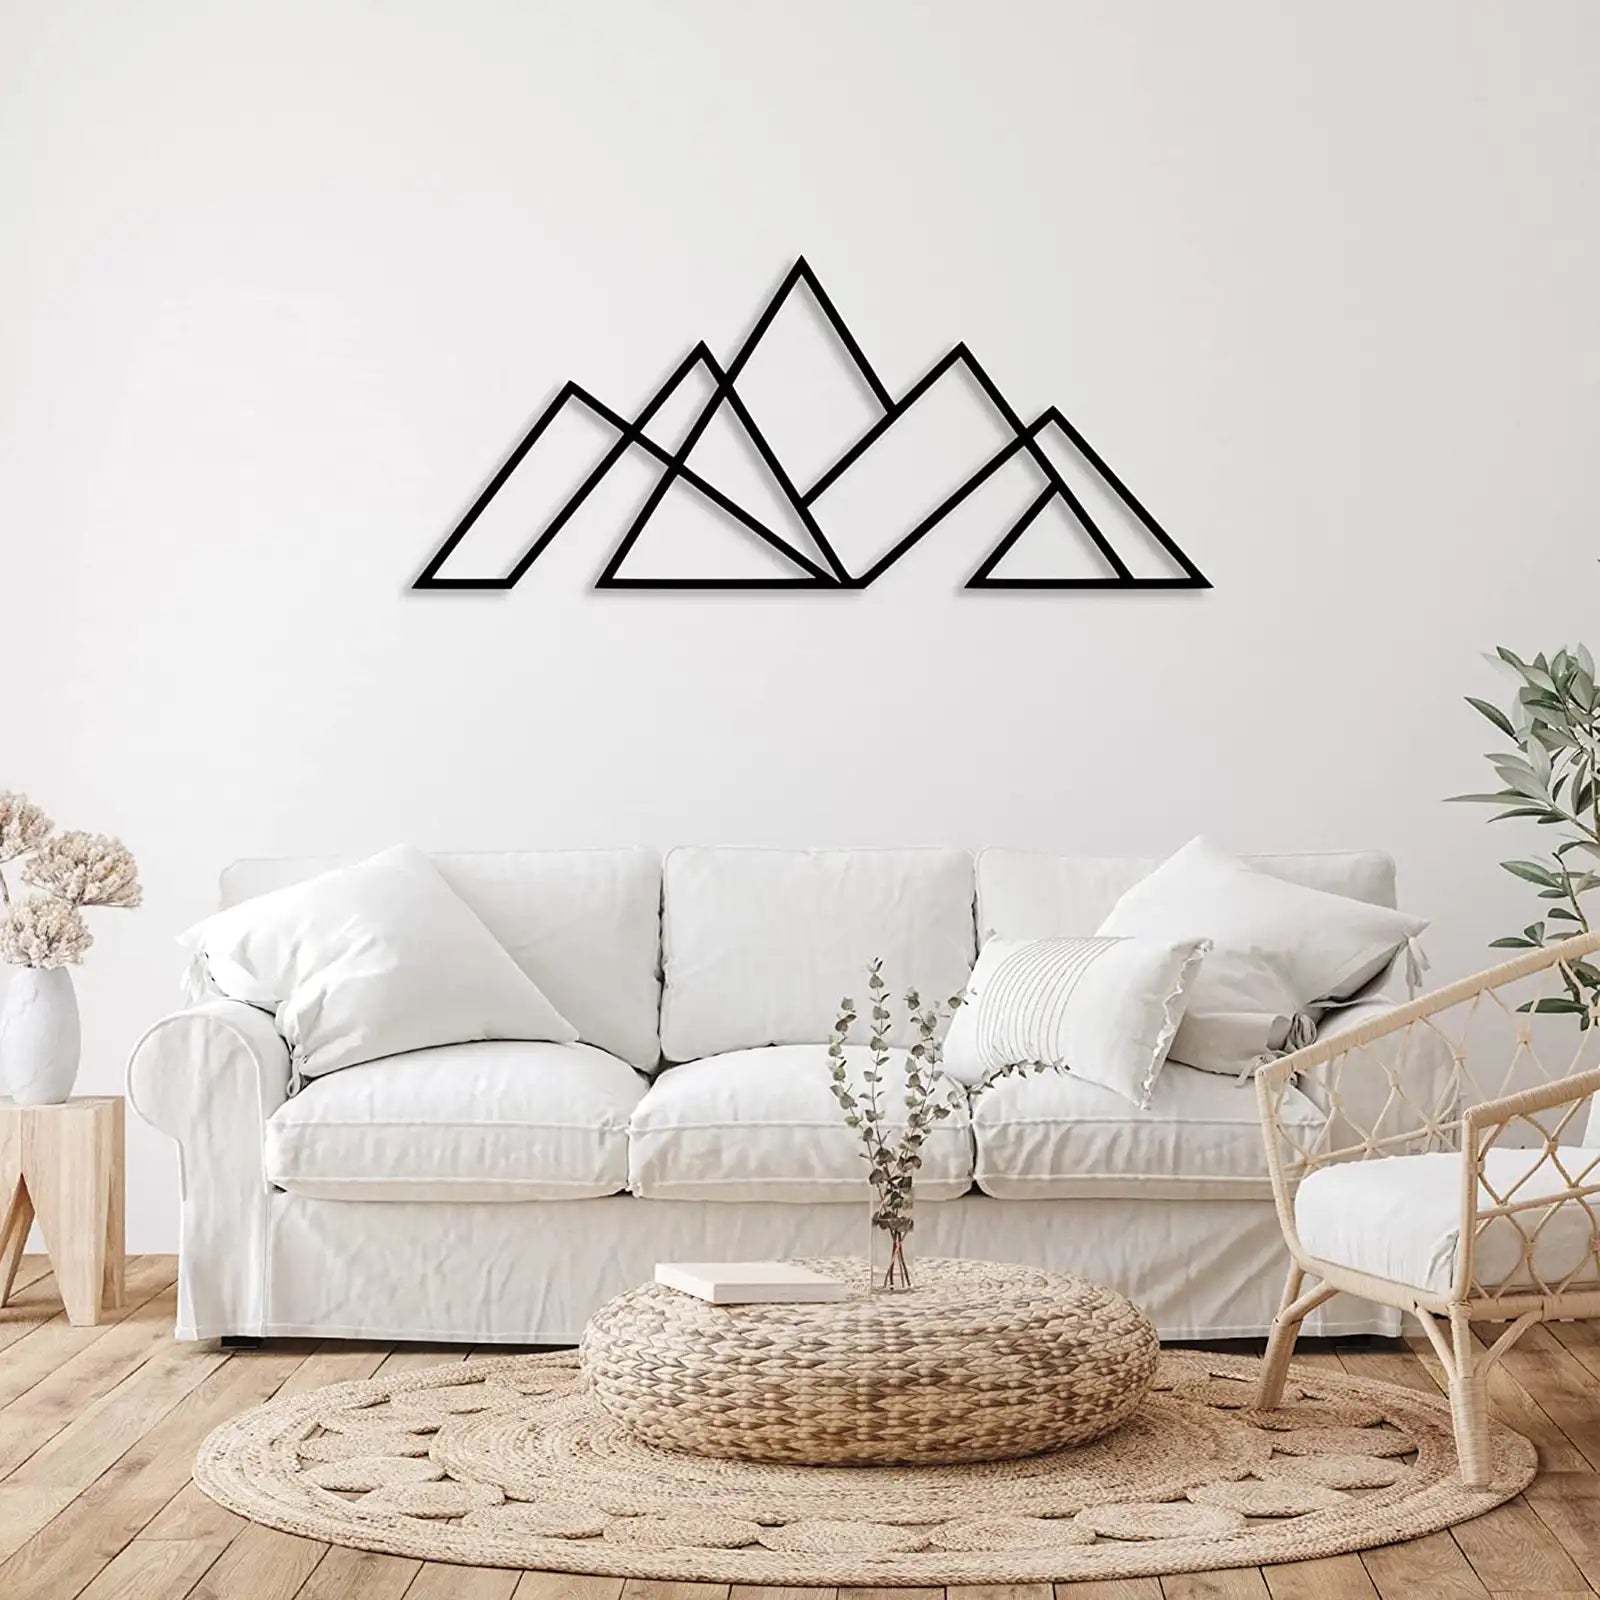 Geometric Mountains Metal Wall Art - Metal Wall Home Decor - Rust Free Outdoor & Indoor Wall Decoration Piece - Hanging Wall Art for Living Room, Bedroom